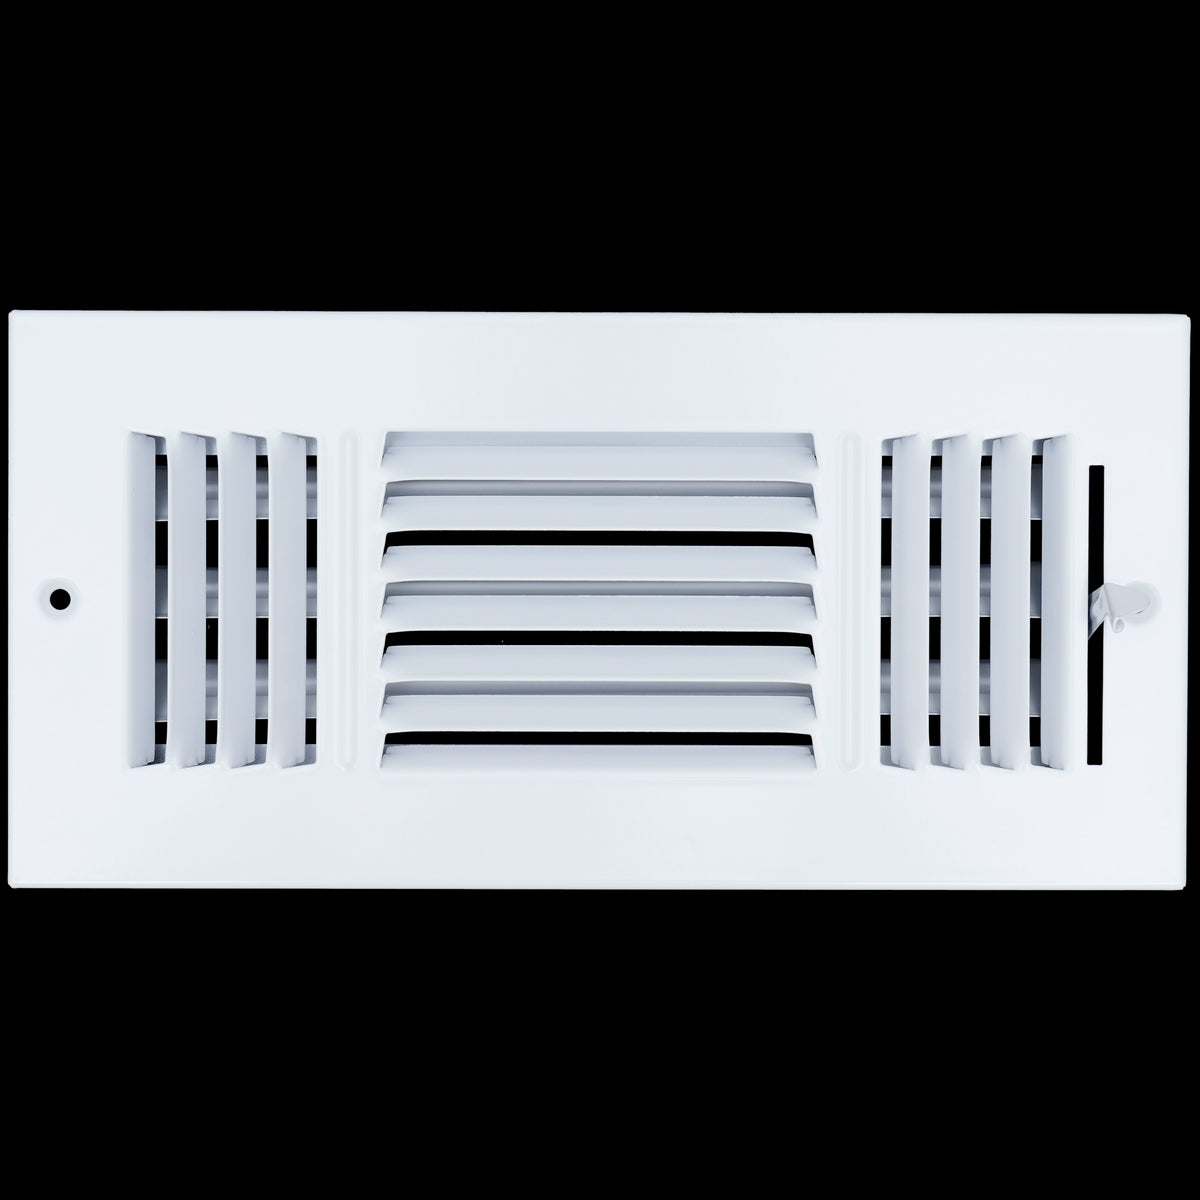 airgrilles 10 x 4 duct opening - 3 way steel air supply diffuser for sidewall and ceiling hnd-asg-wh-3way-10x4 764613097801 - 1